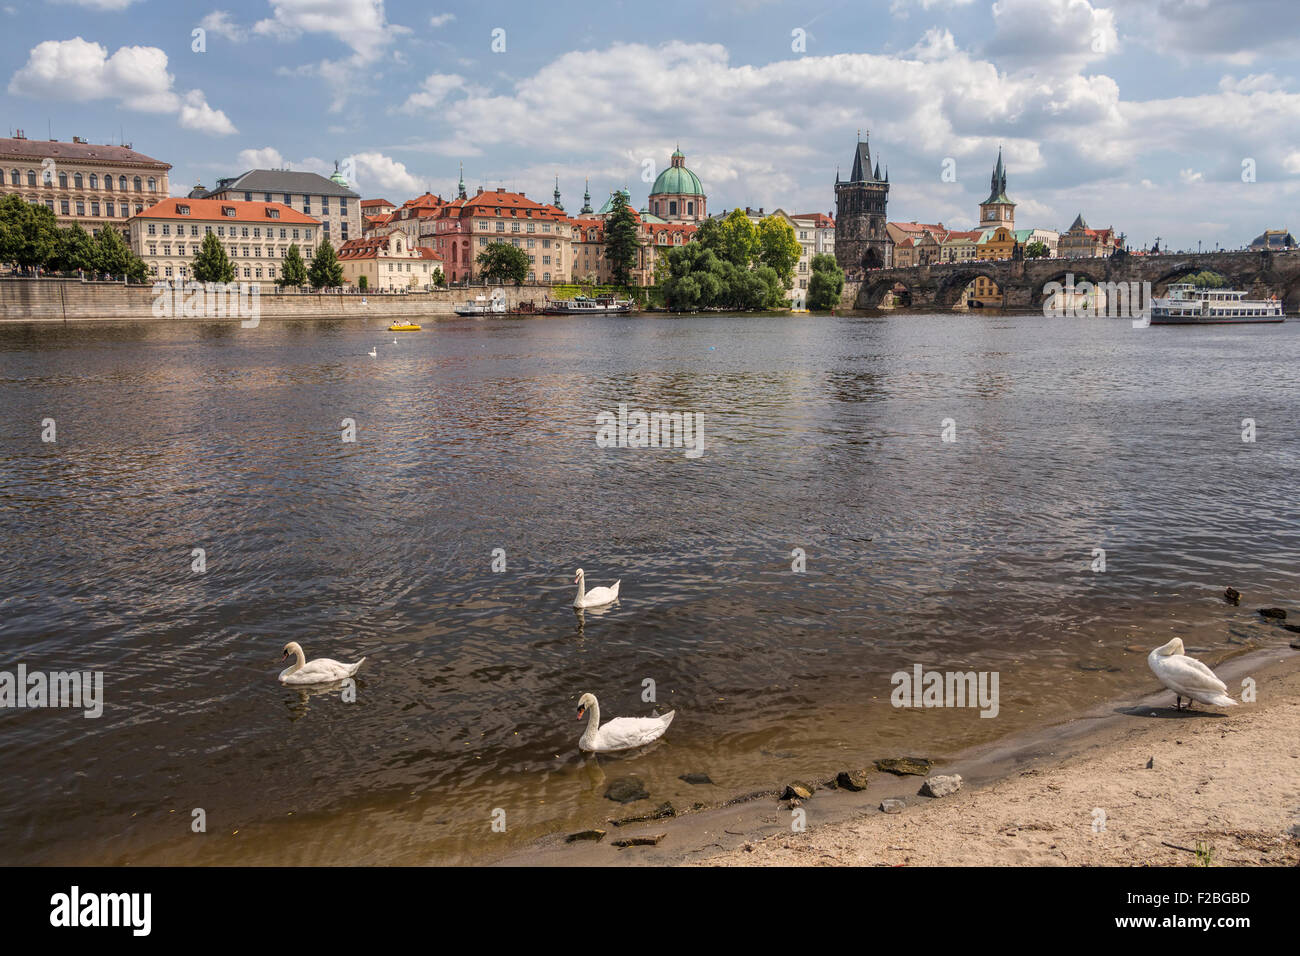 Old town and charles bridge and swans on river Vltava in Prague. Stock Photo